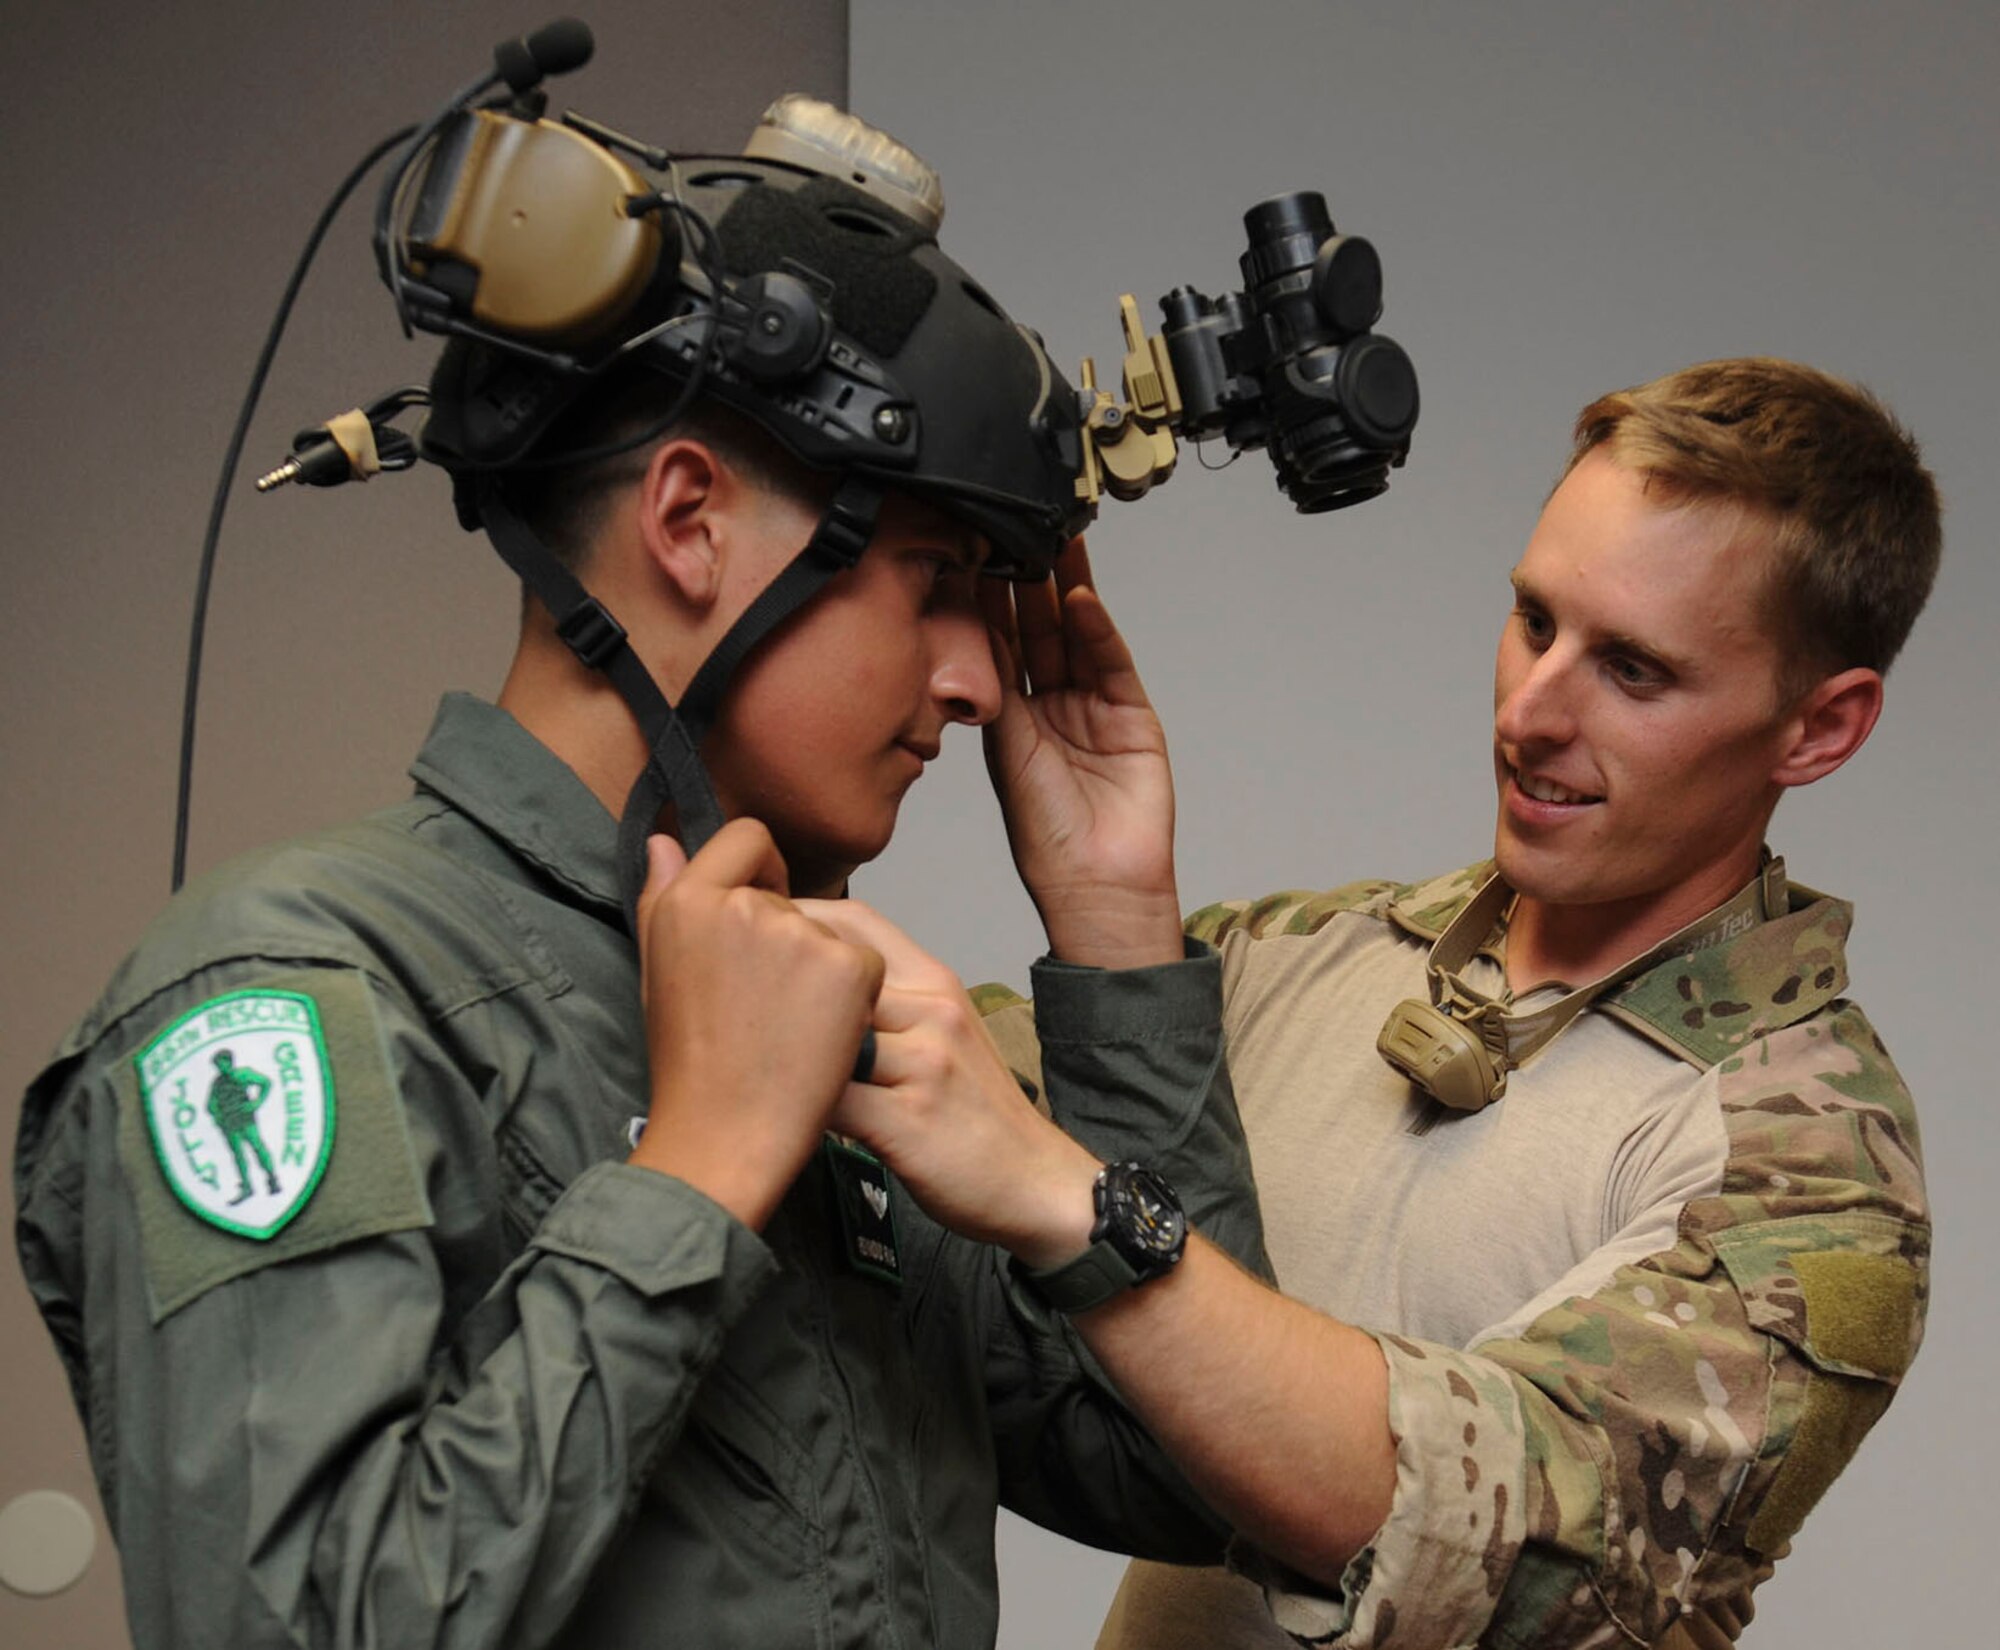 A pararescueman shows Reymond their night vision equipment during his visit to the 66th Rescue Squadron at Nellis Air Force Base, Nev., July 19, 2016. In addition to visiting with the pararescuemen, Reymond got a first-hand look inside the HH-60. (U.S. Air Force photo by Staff Sgt. Darlene Seltmann)